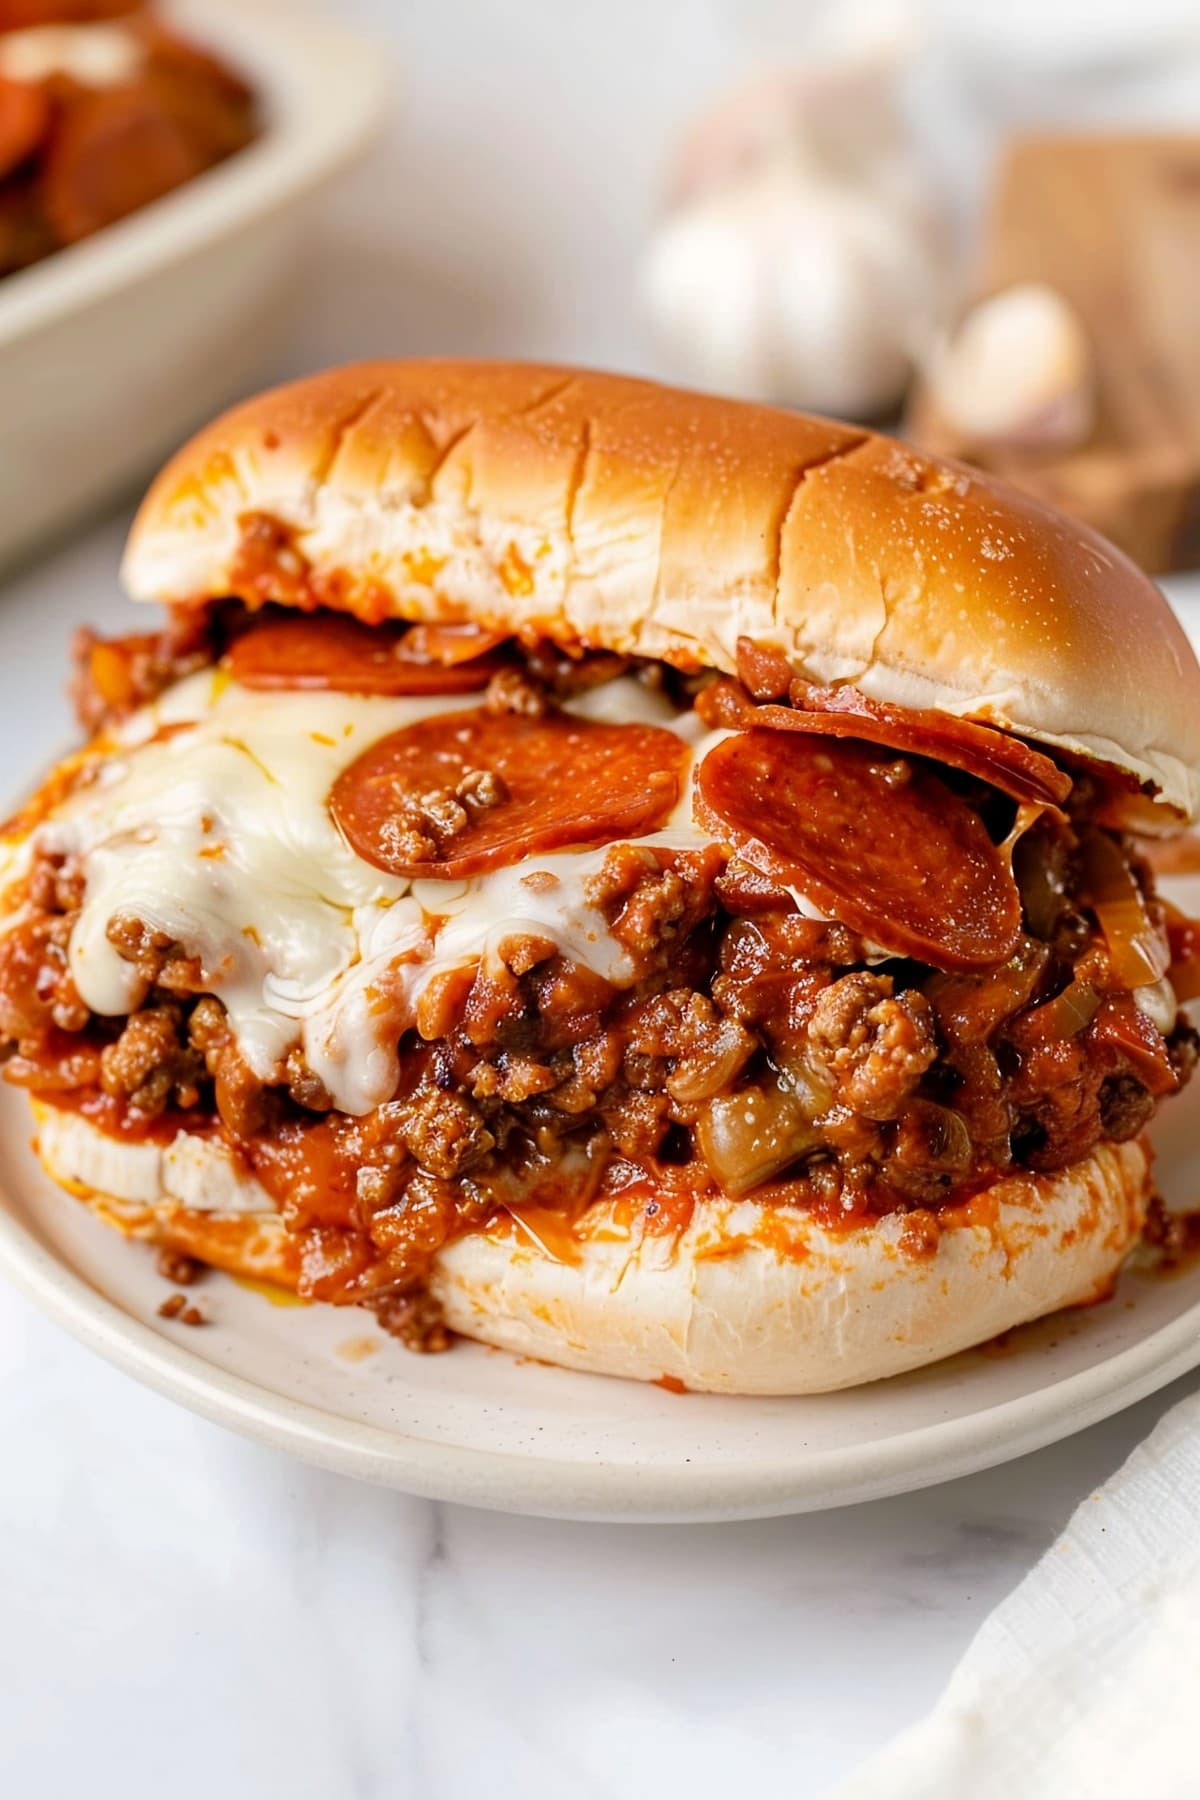 Savory pepperoni pizza sloppy joes, featuring seasoned ground beef, Italian sausage and melted cheese